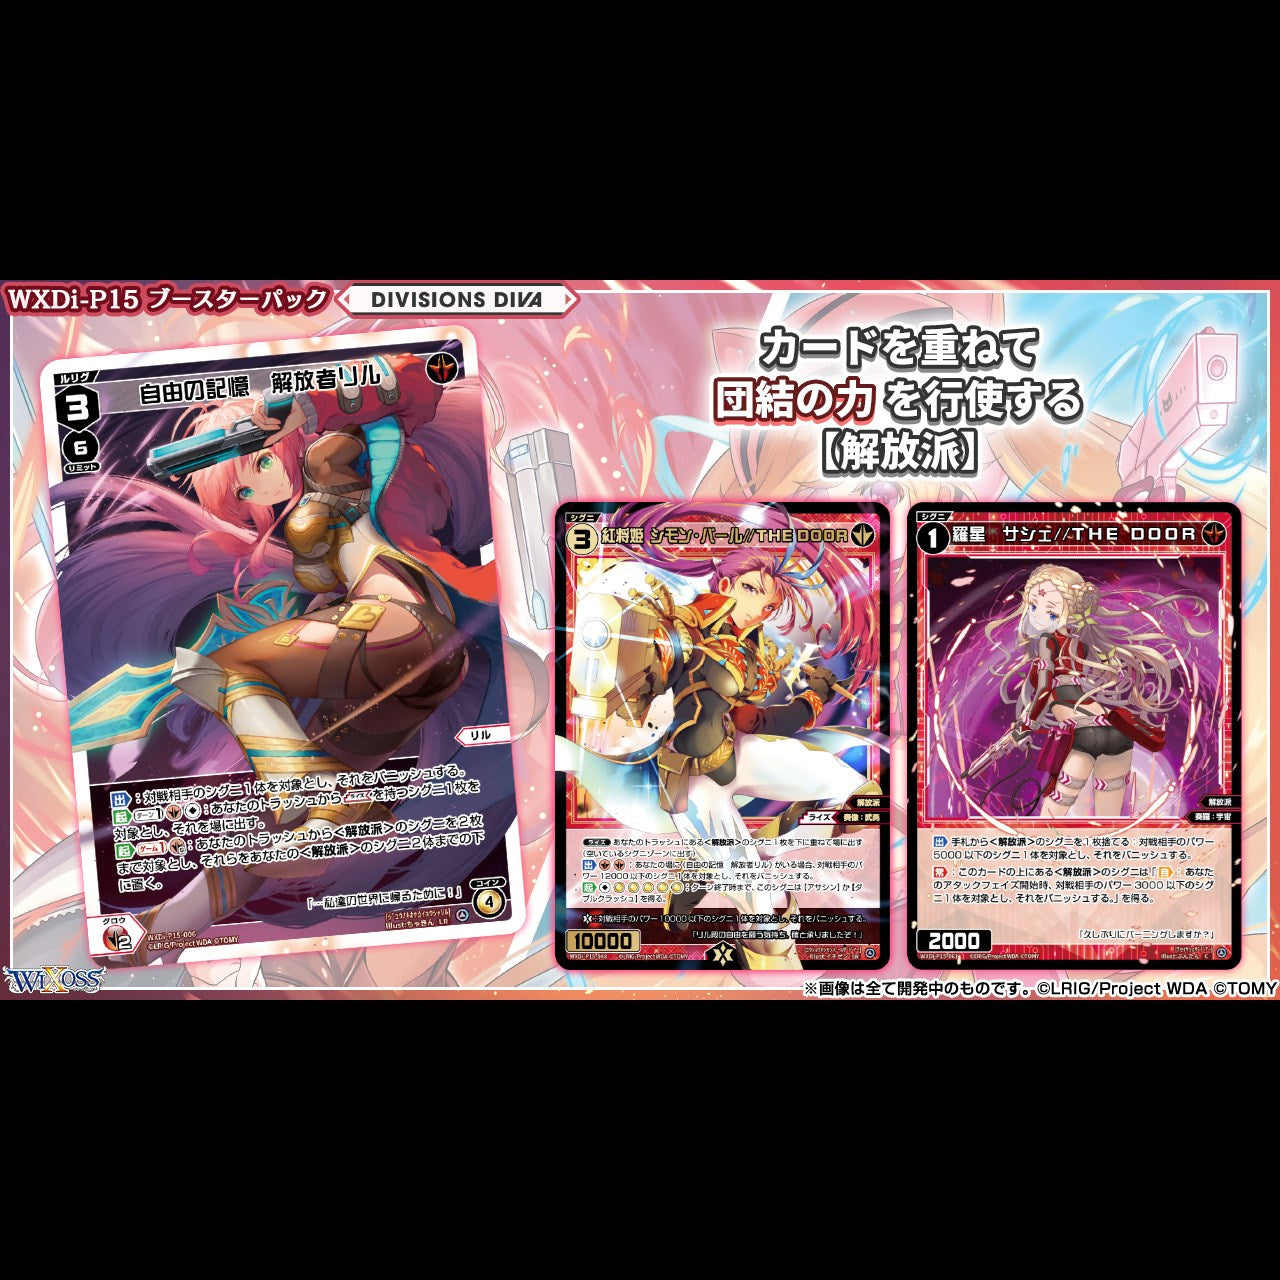 WIXOSS TCG Booster Pack DIVISIONS DIVA WXDi-P15